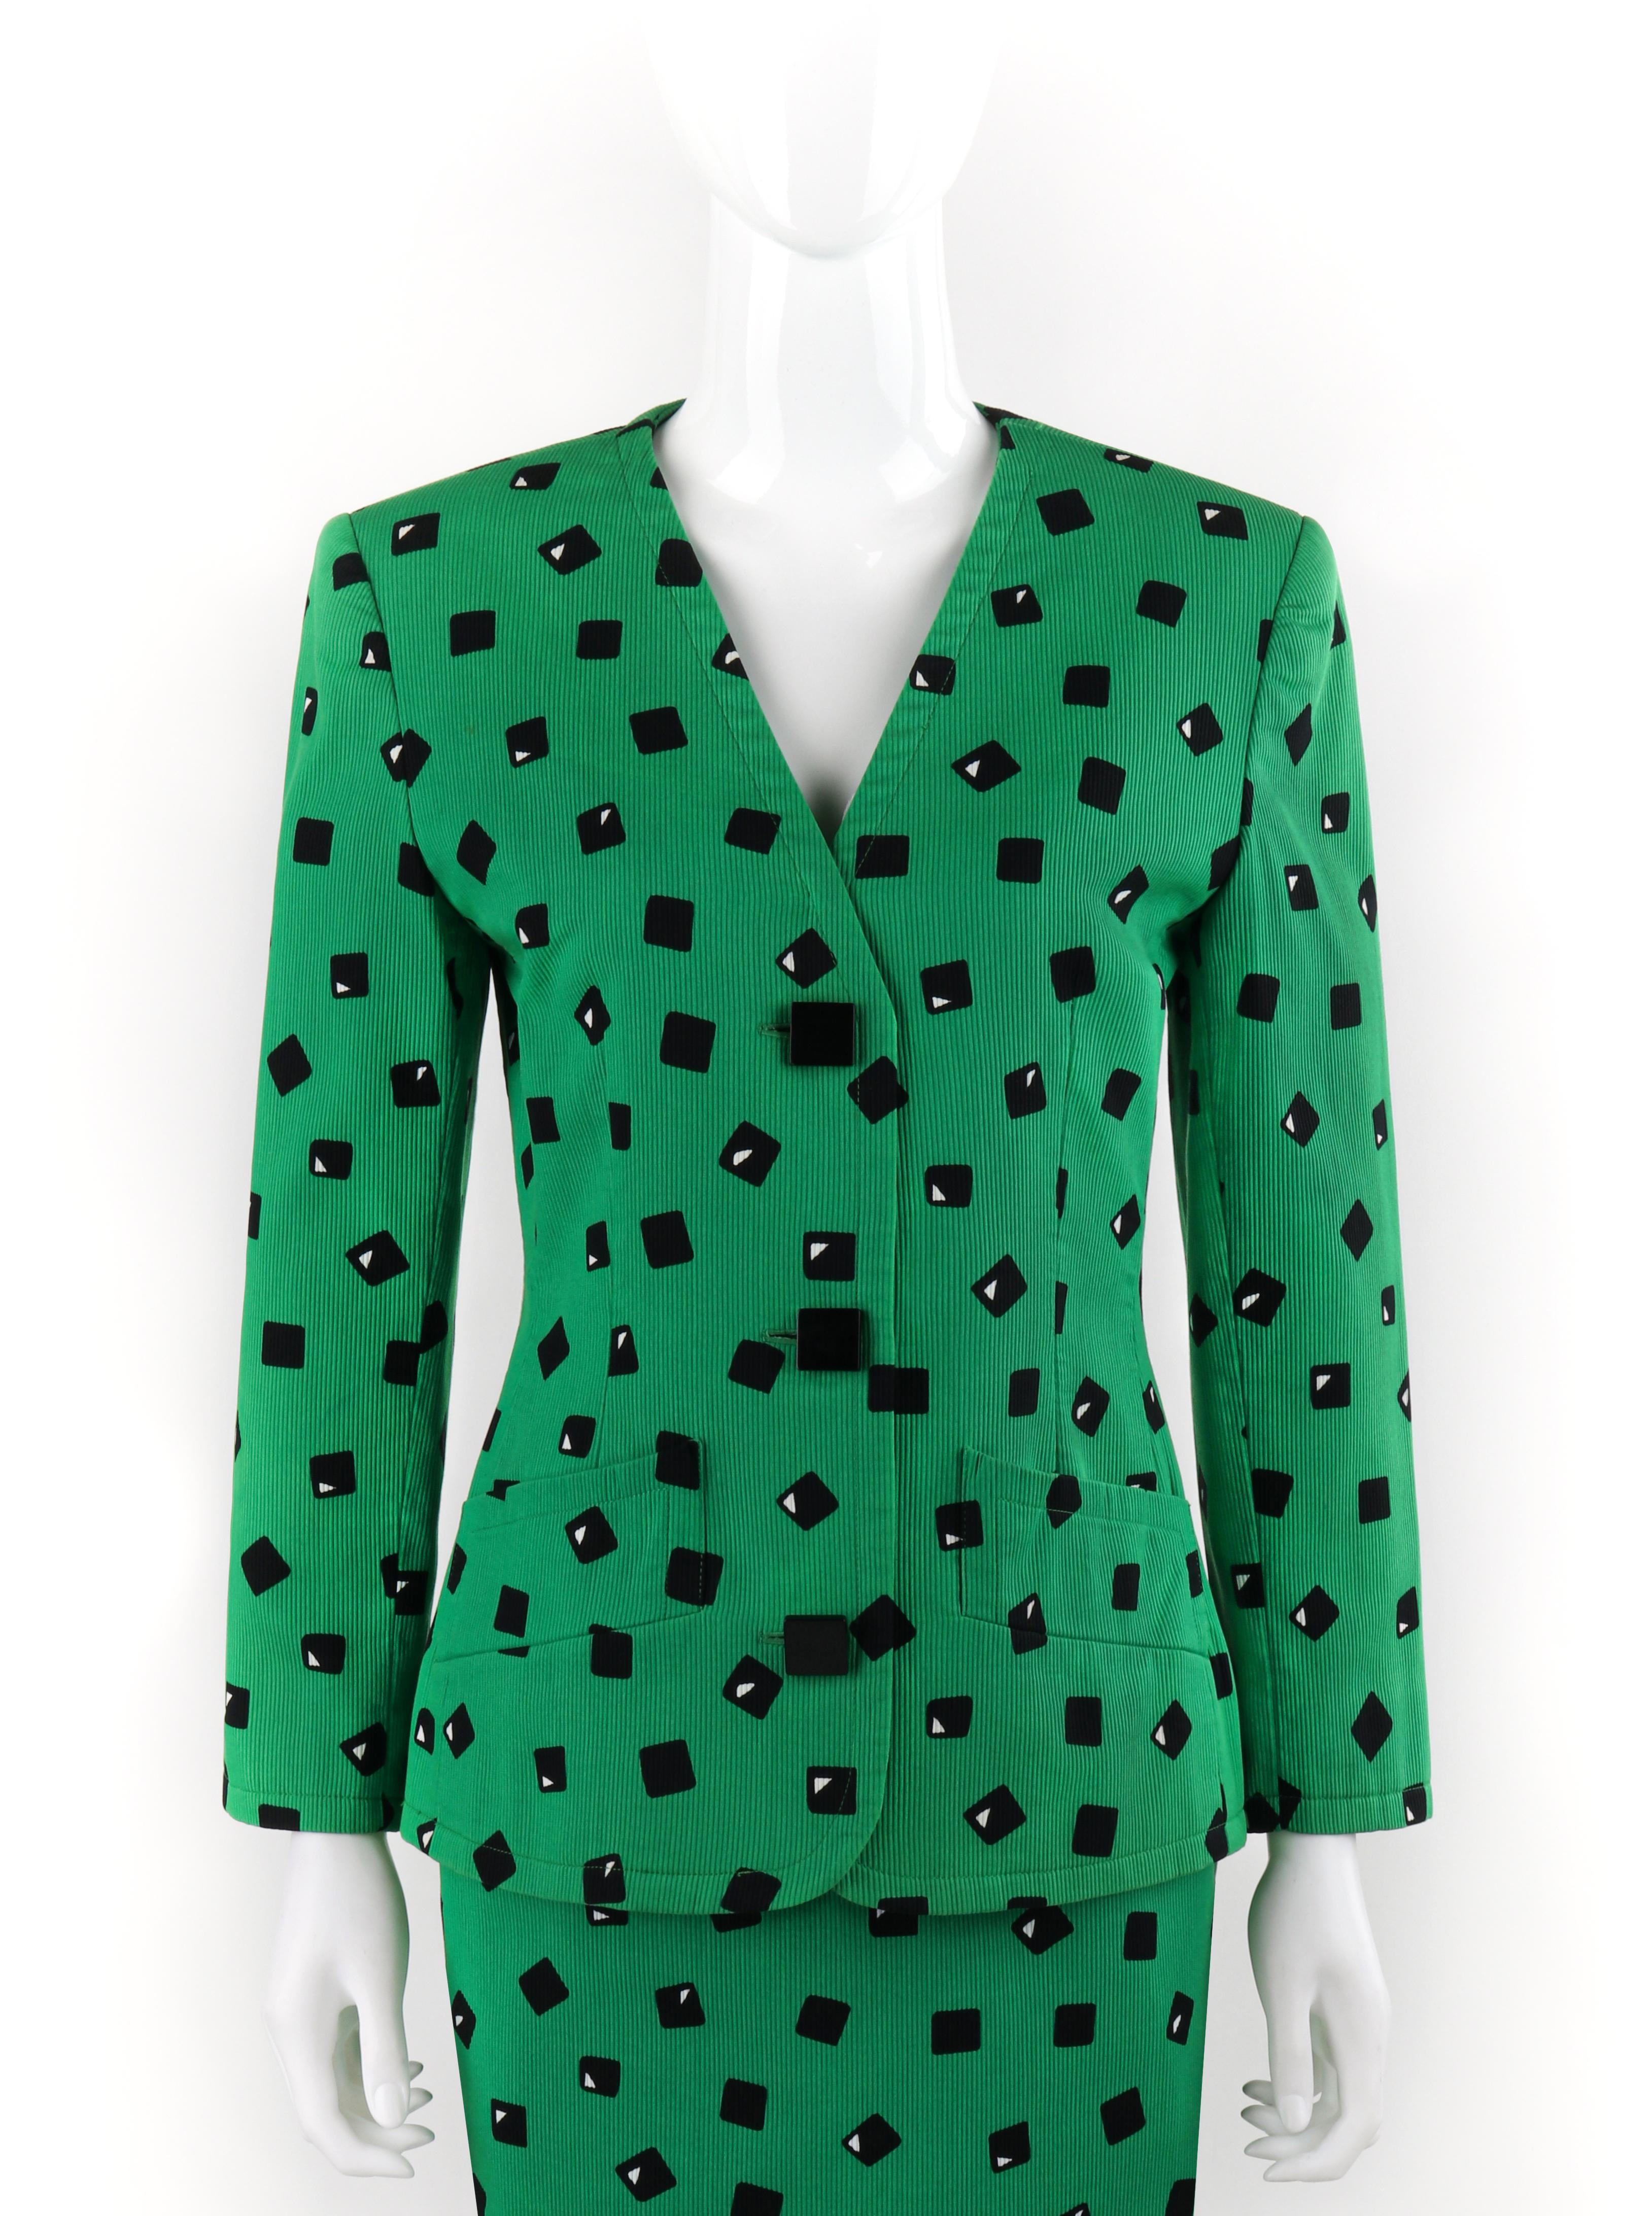 Couture HUBERT de GIVENCHY c.1980’s Green Black Blazer Skirt Suit Set Numbered
 
Brand / Manufacturer: Givenchy (couture / numbered)
Circa: 1980’s
Style: Skirt and Jacket Set
Color(s): Shades of green, white, and black
Lined: Yes
Unmarked Fabric